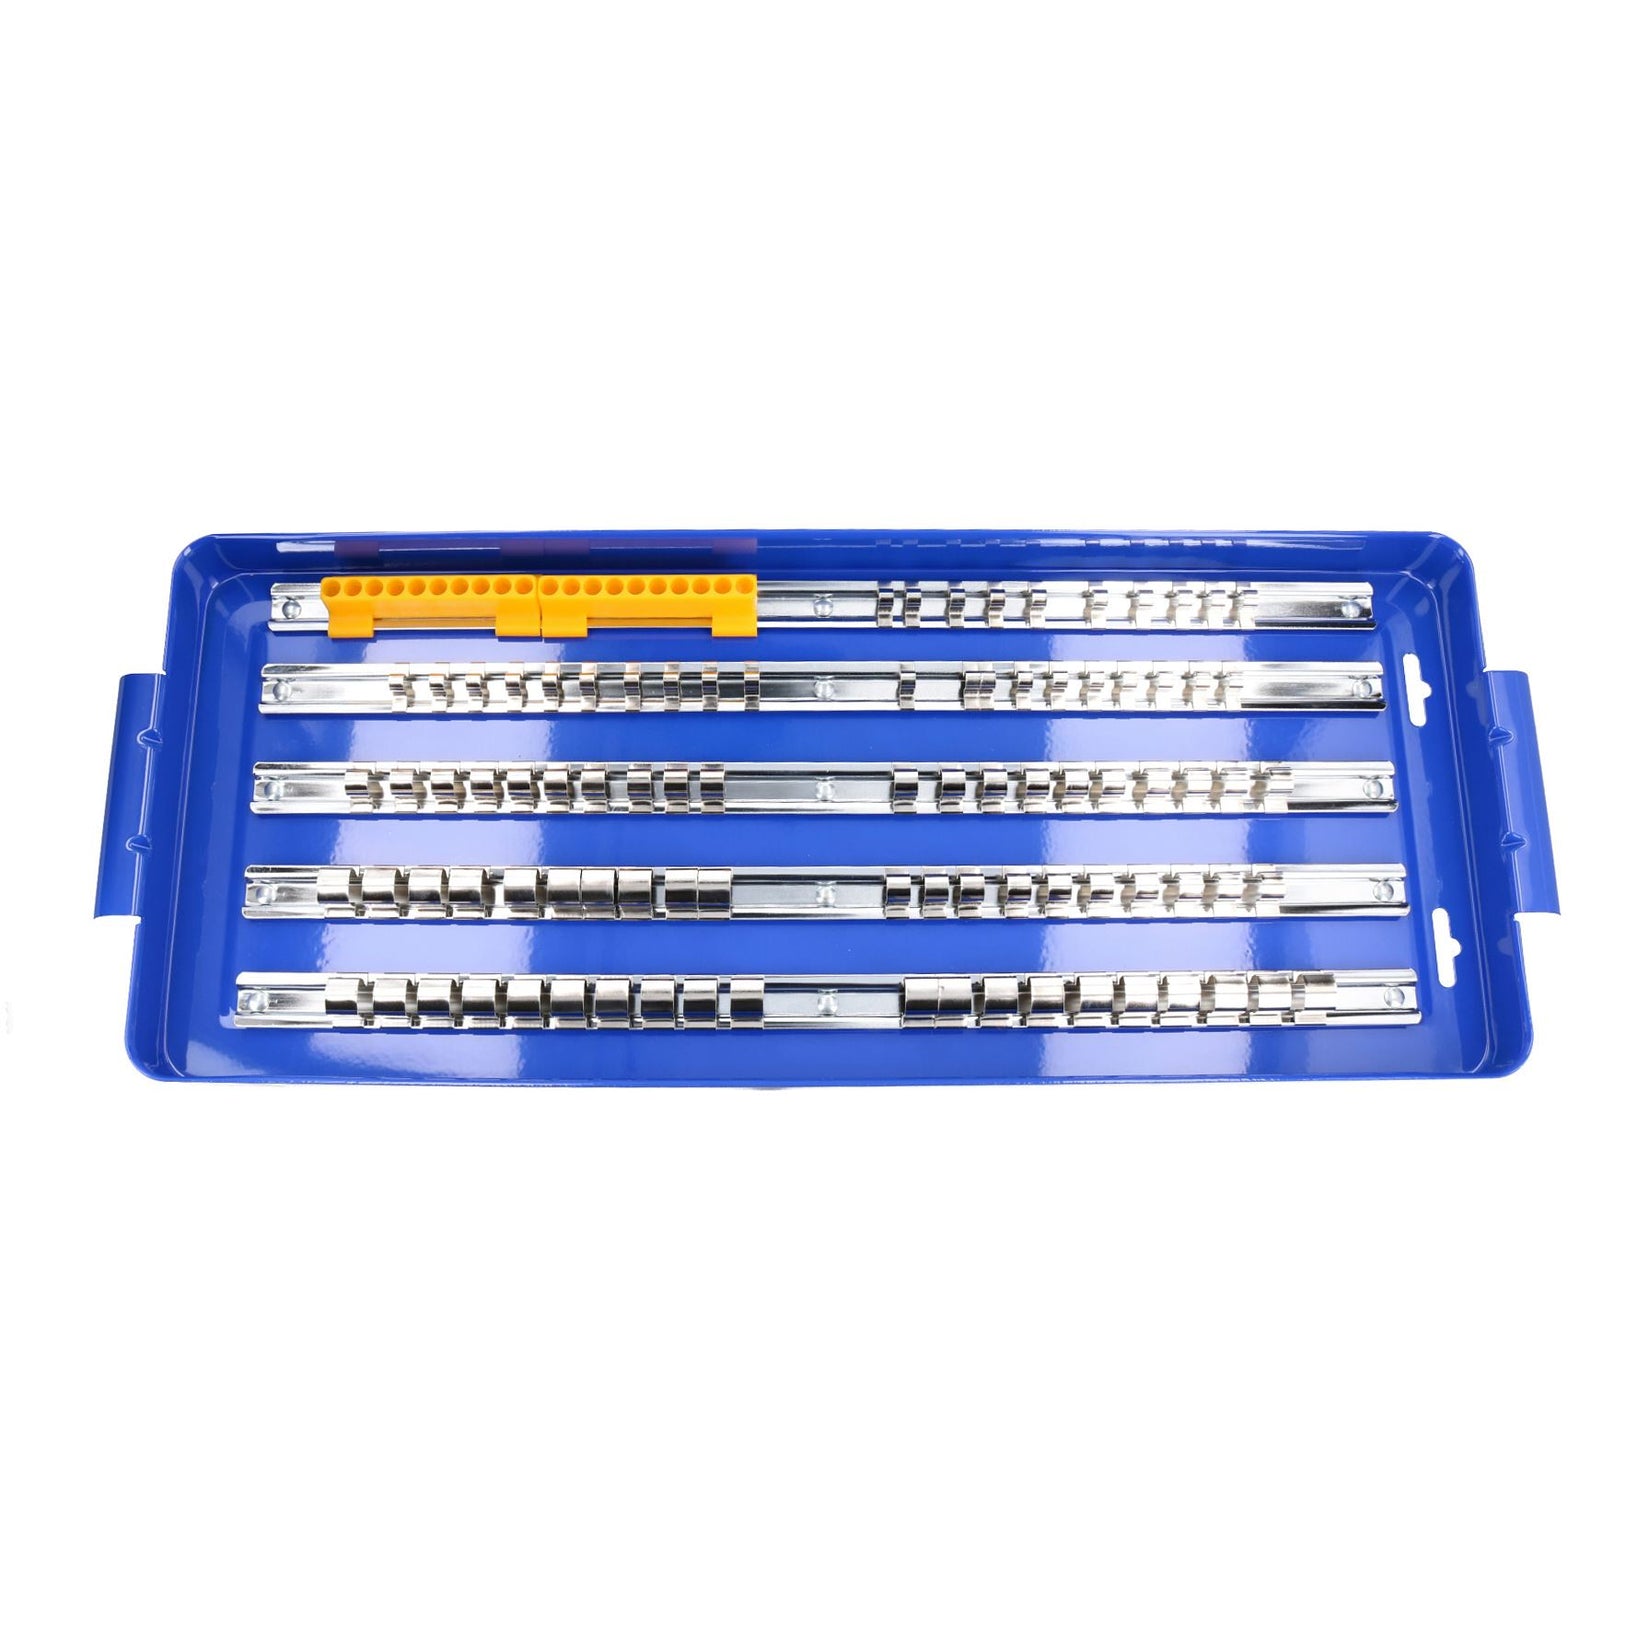 Socket and screwdriver tray rack holder 1/4, 3/8, 1/2 drive 110pc AT624